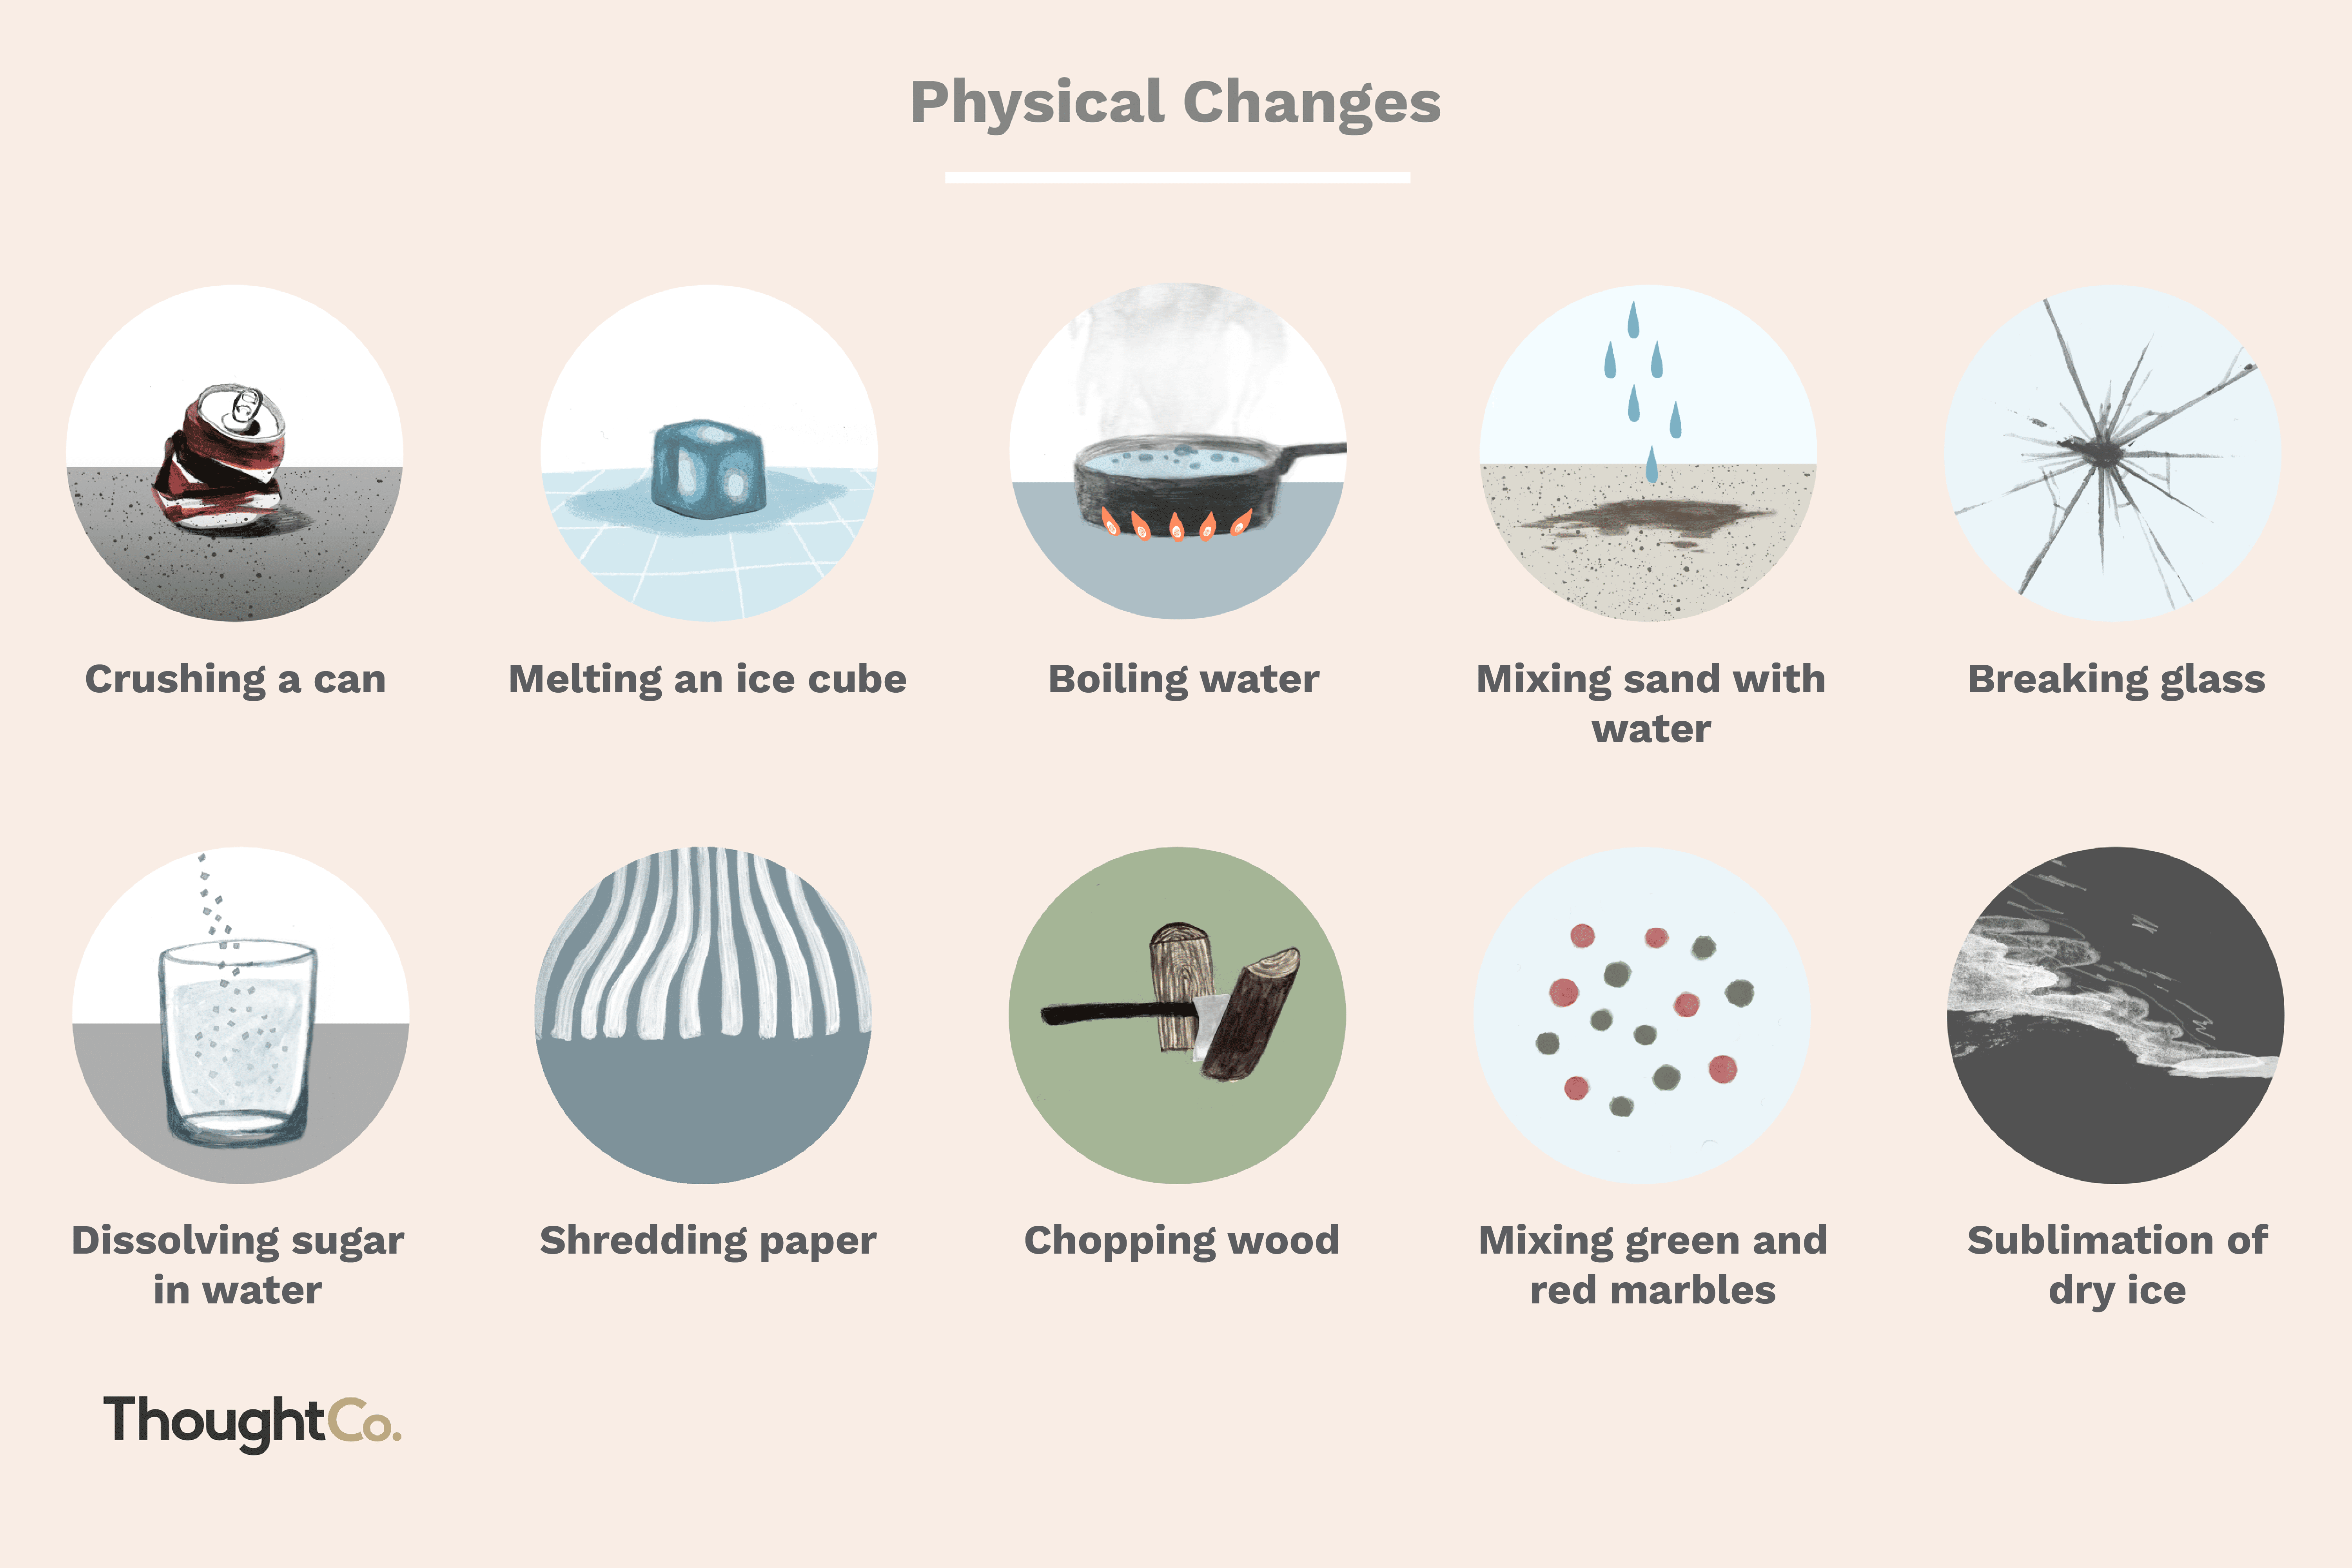 how are physical changes related to physical properties